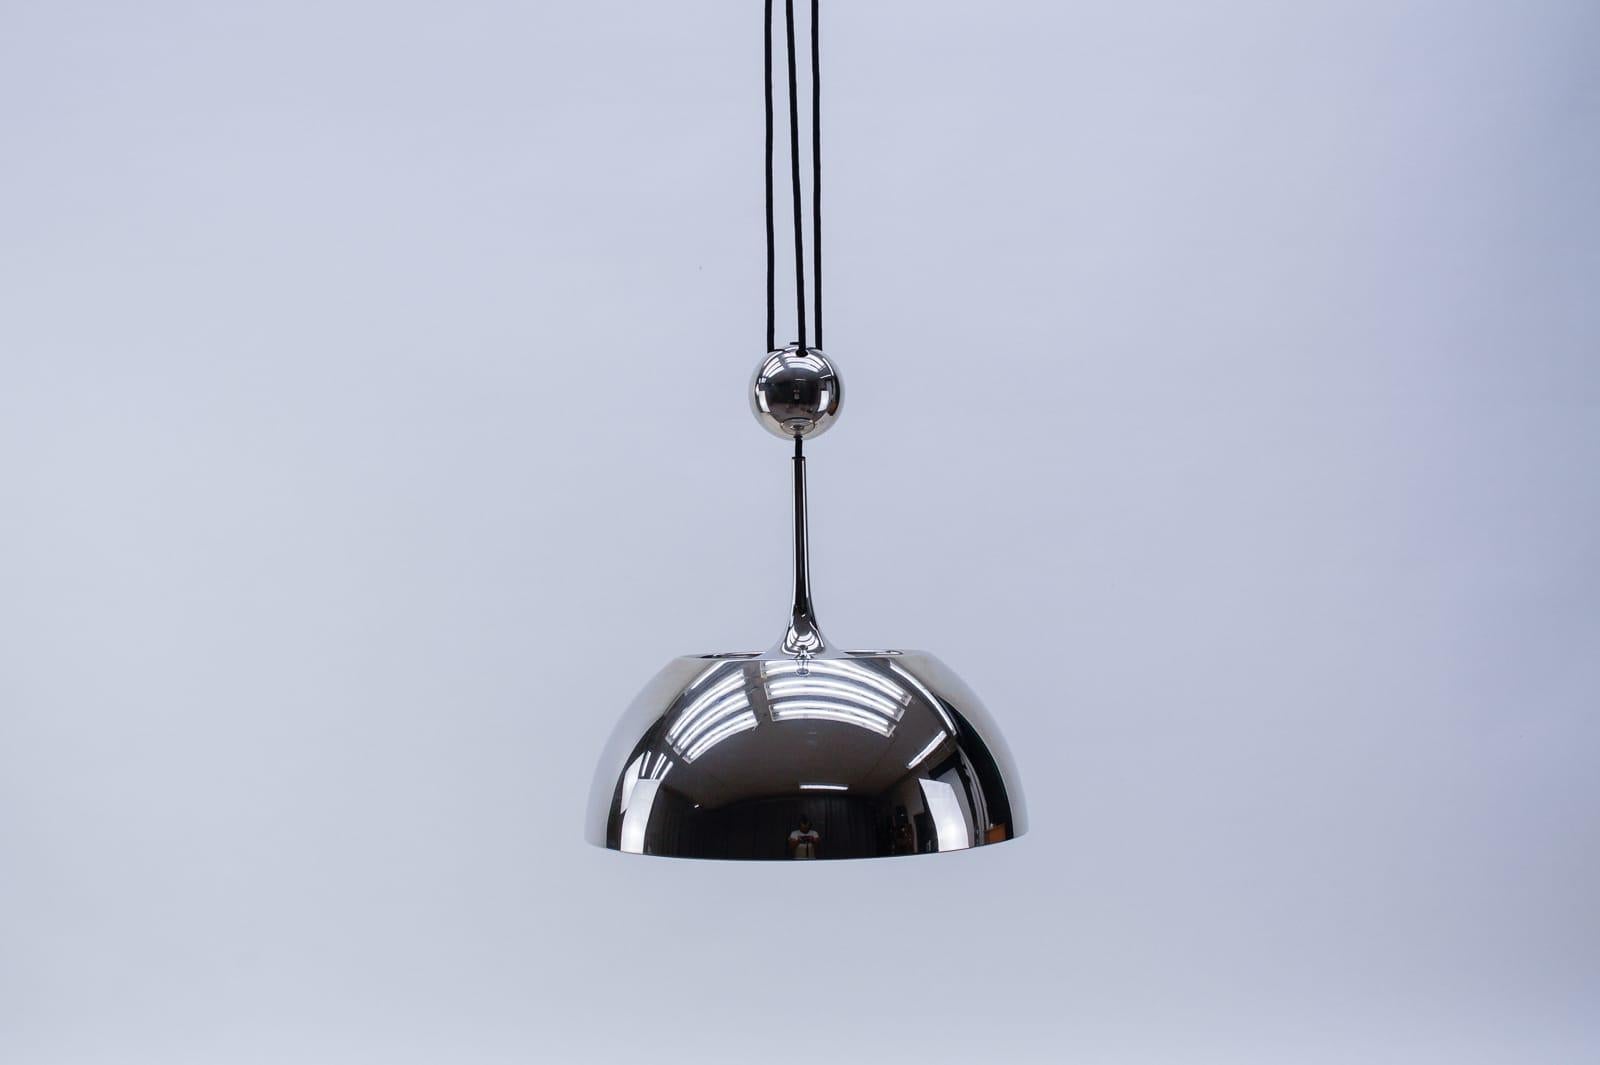 Mid-Century Modern Florian Schulz Nickel Plated Pendant Lamp with Counterweight, Germany, 1970s For Sale